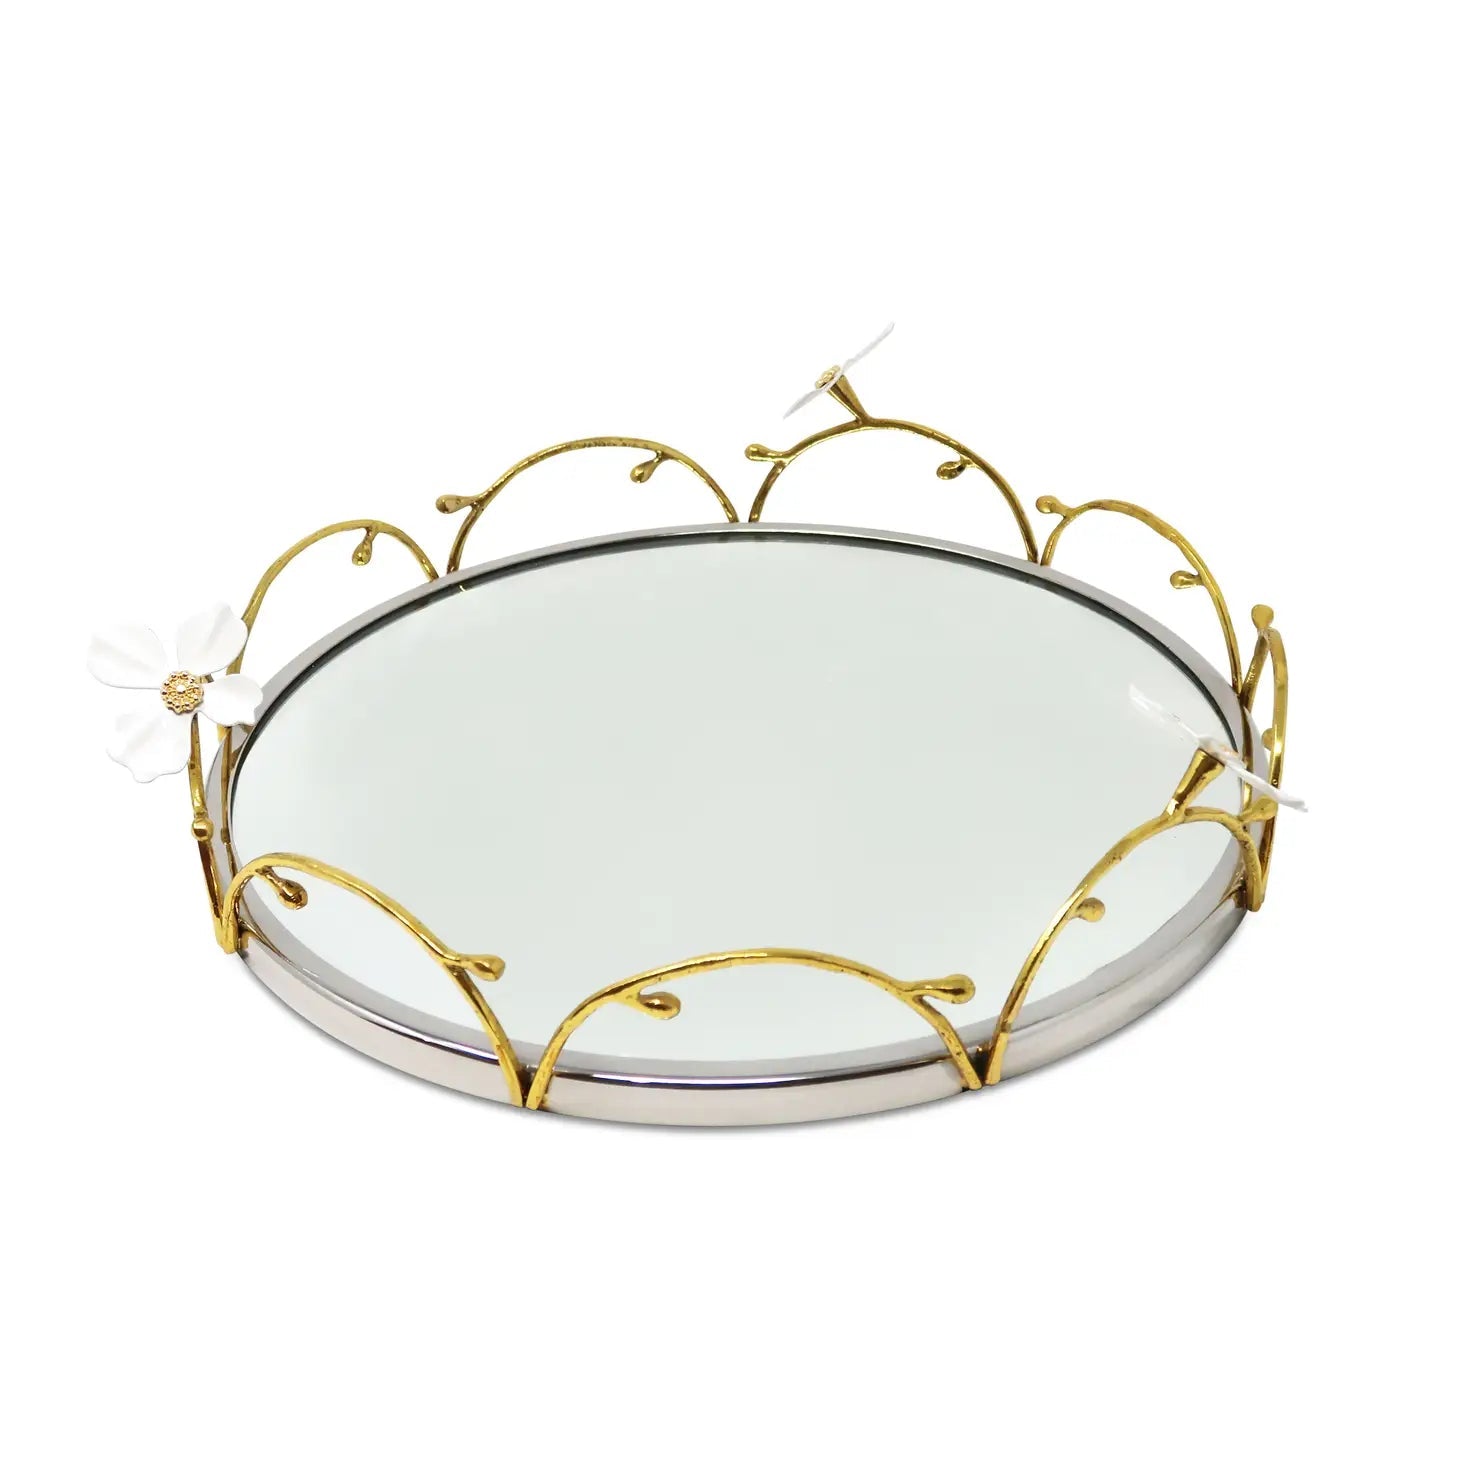 Gold Loop Round Tray with Jewel Flowers Design Decorative Trays High Class Touch - Home Decor 